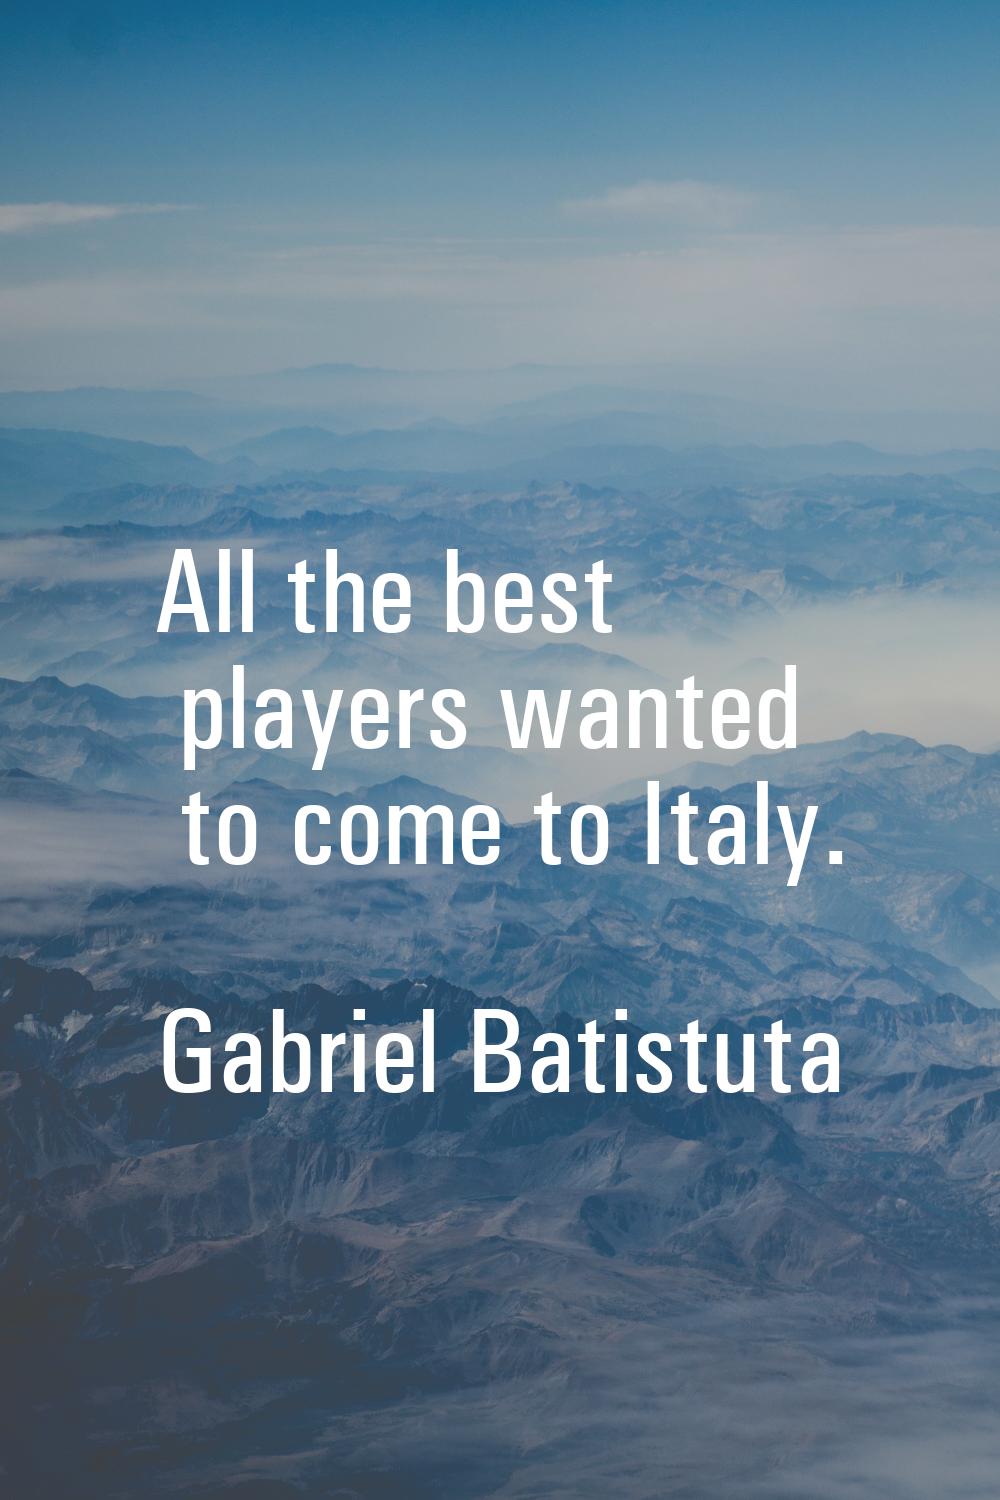 All the best players wanted to come to Italy.